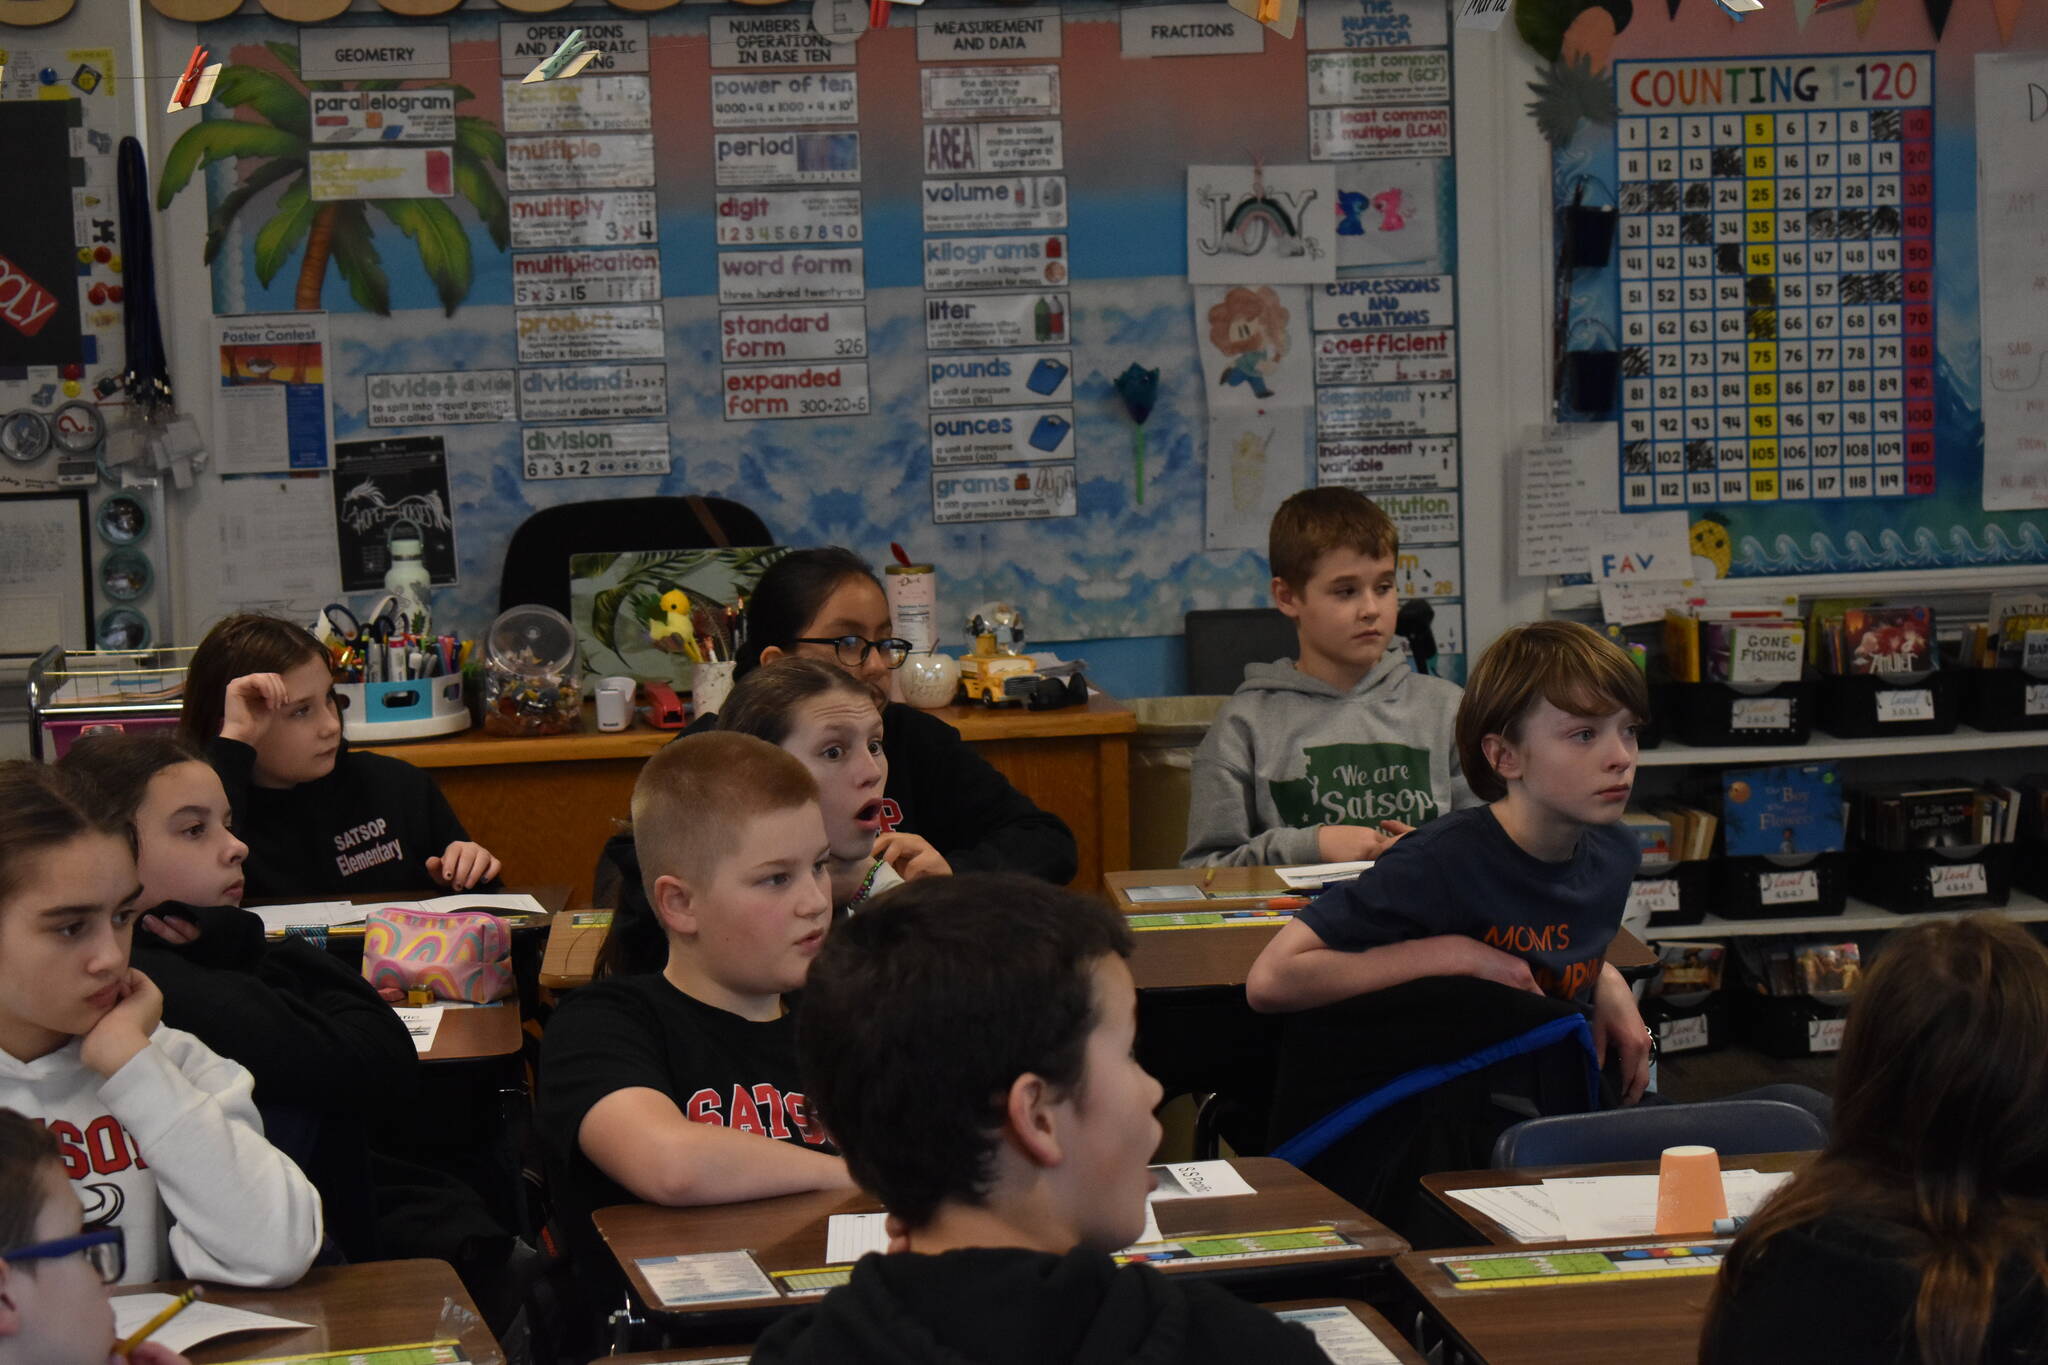 (Clayton Franke / The Daily World) Students at Satsop Elementary listened to a presentation on Friday, Feb. 10 by Jeff Hummel about his discovery of the shipwrecked SS Pacific.